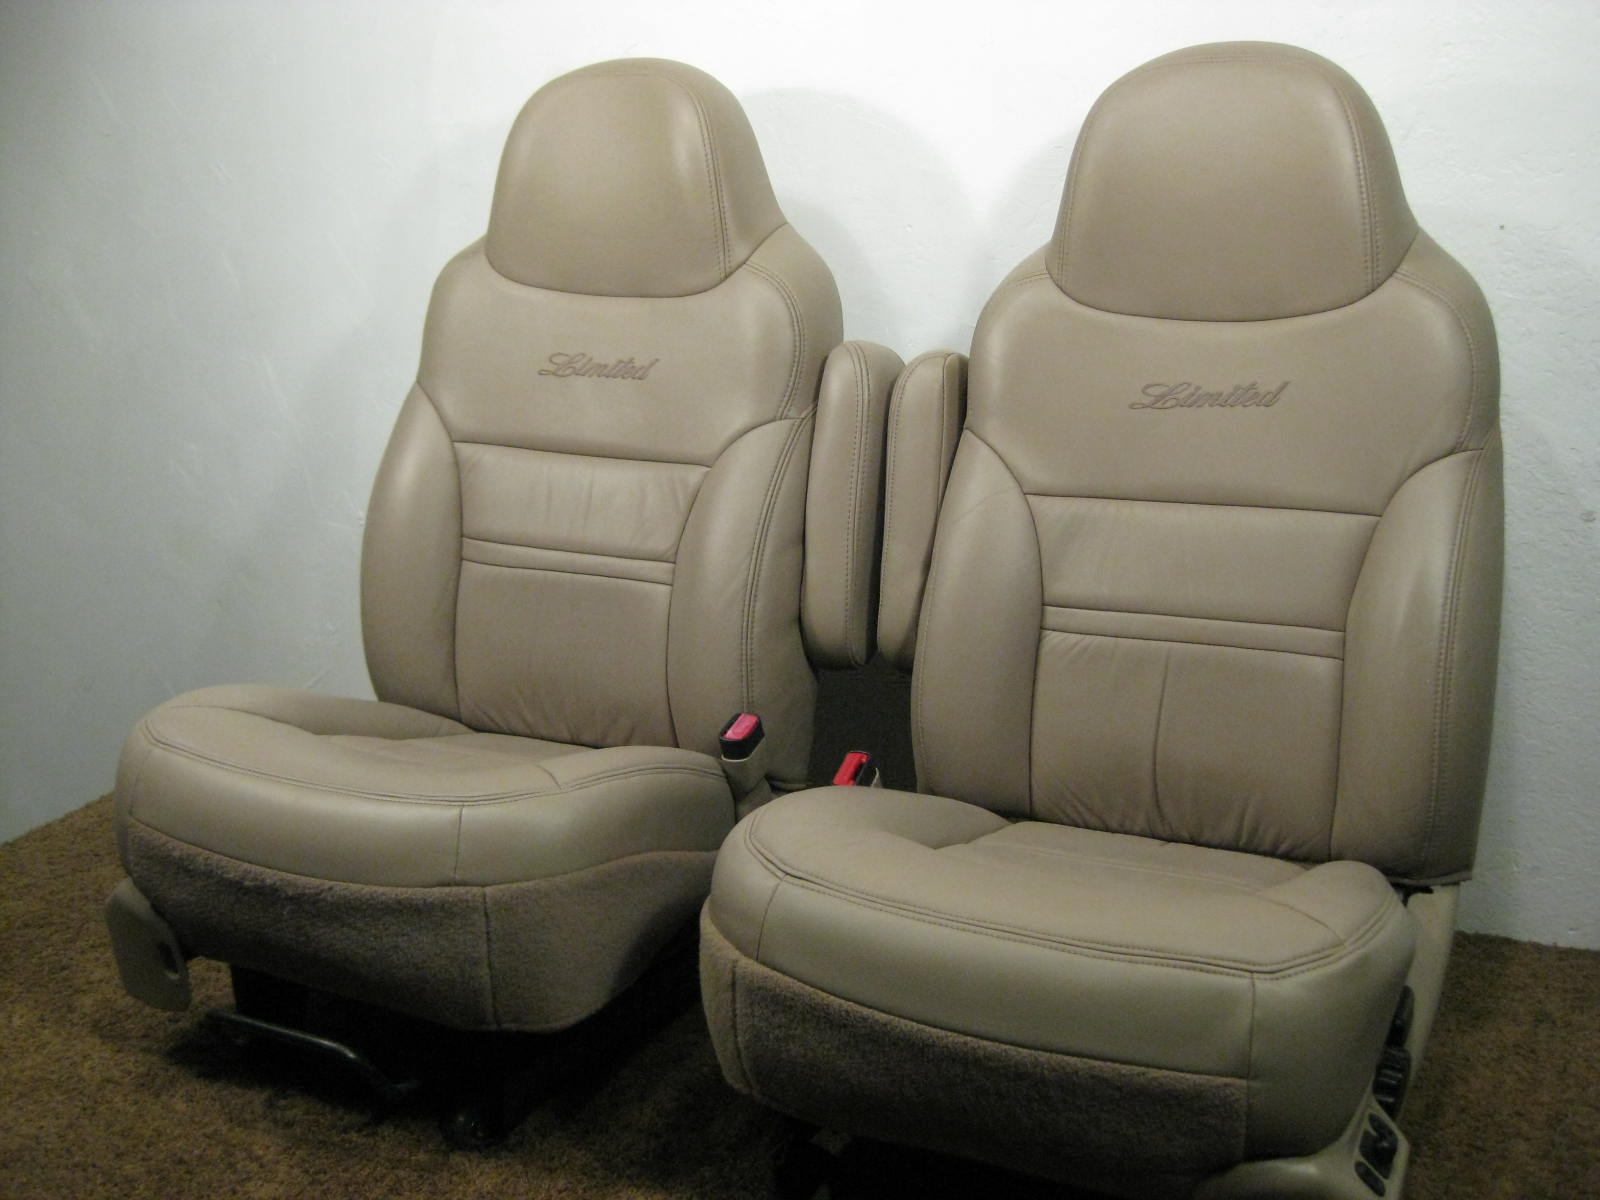 ford excursion seating capacity